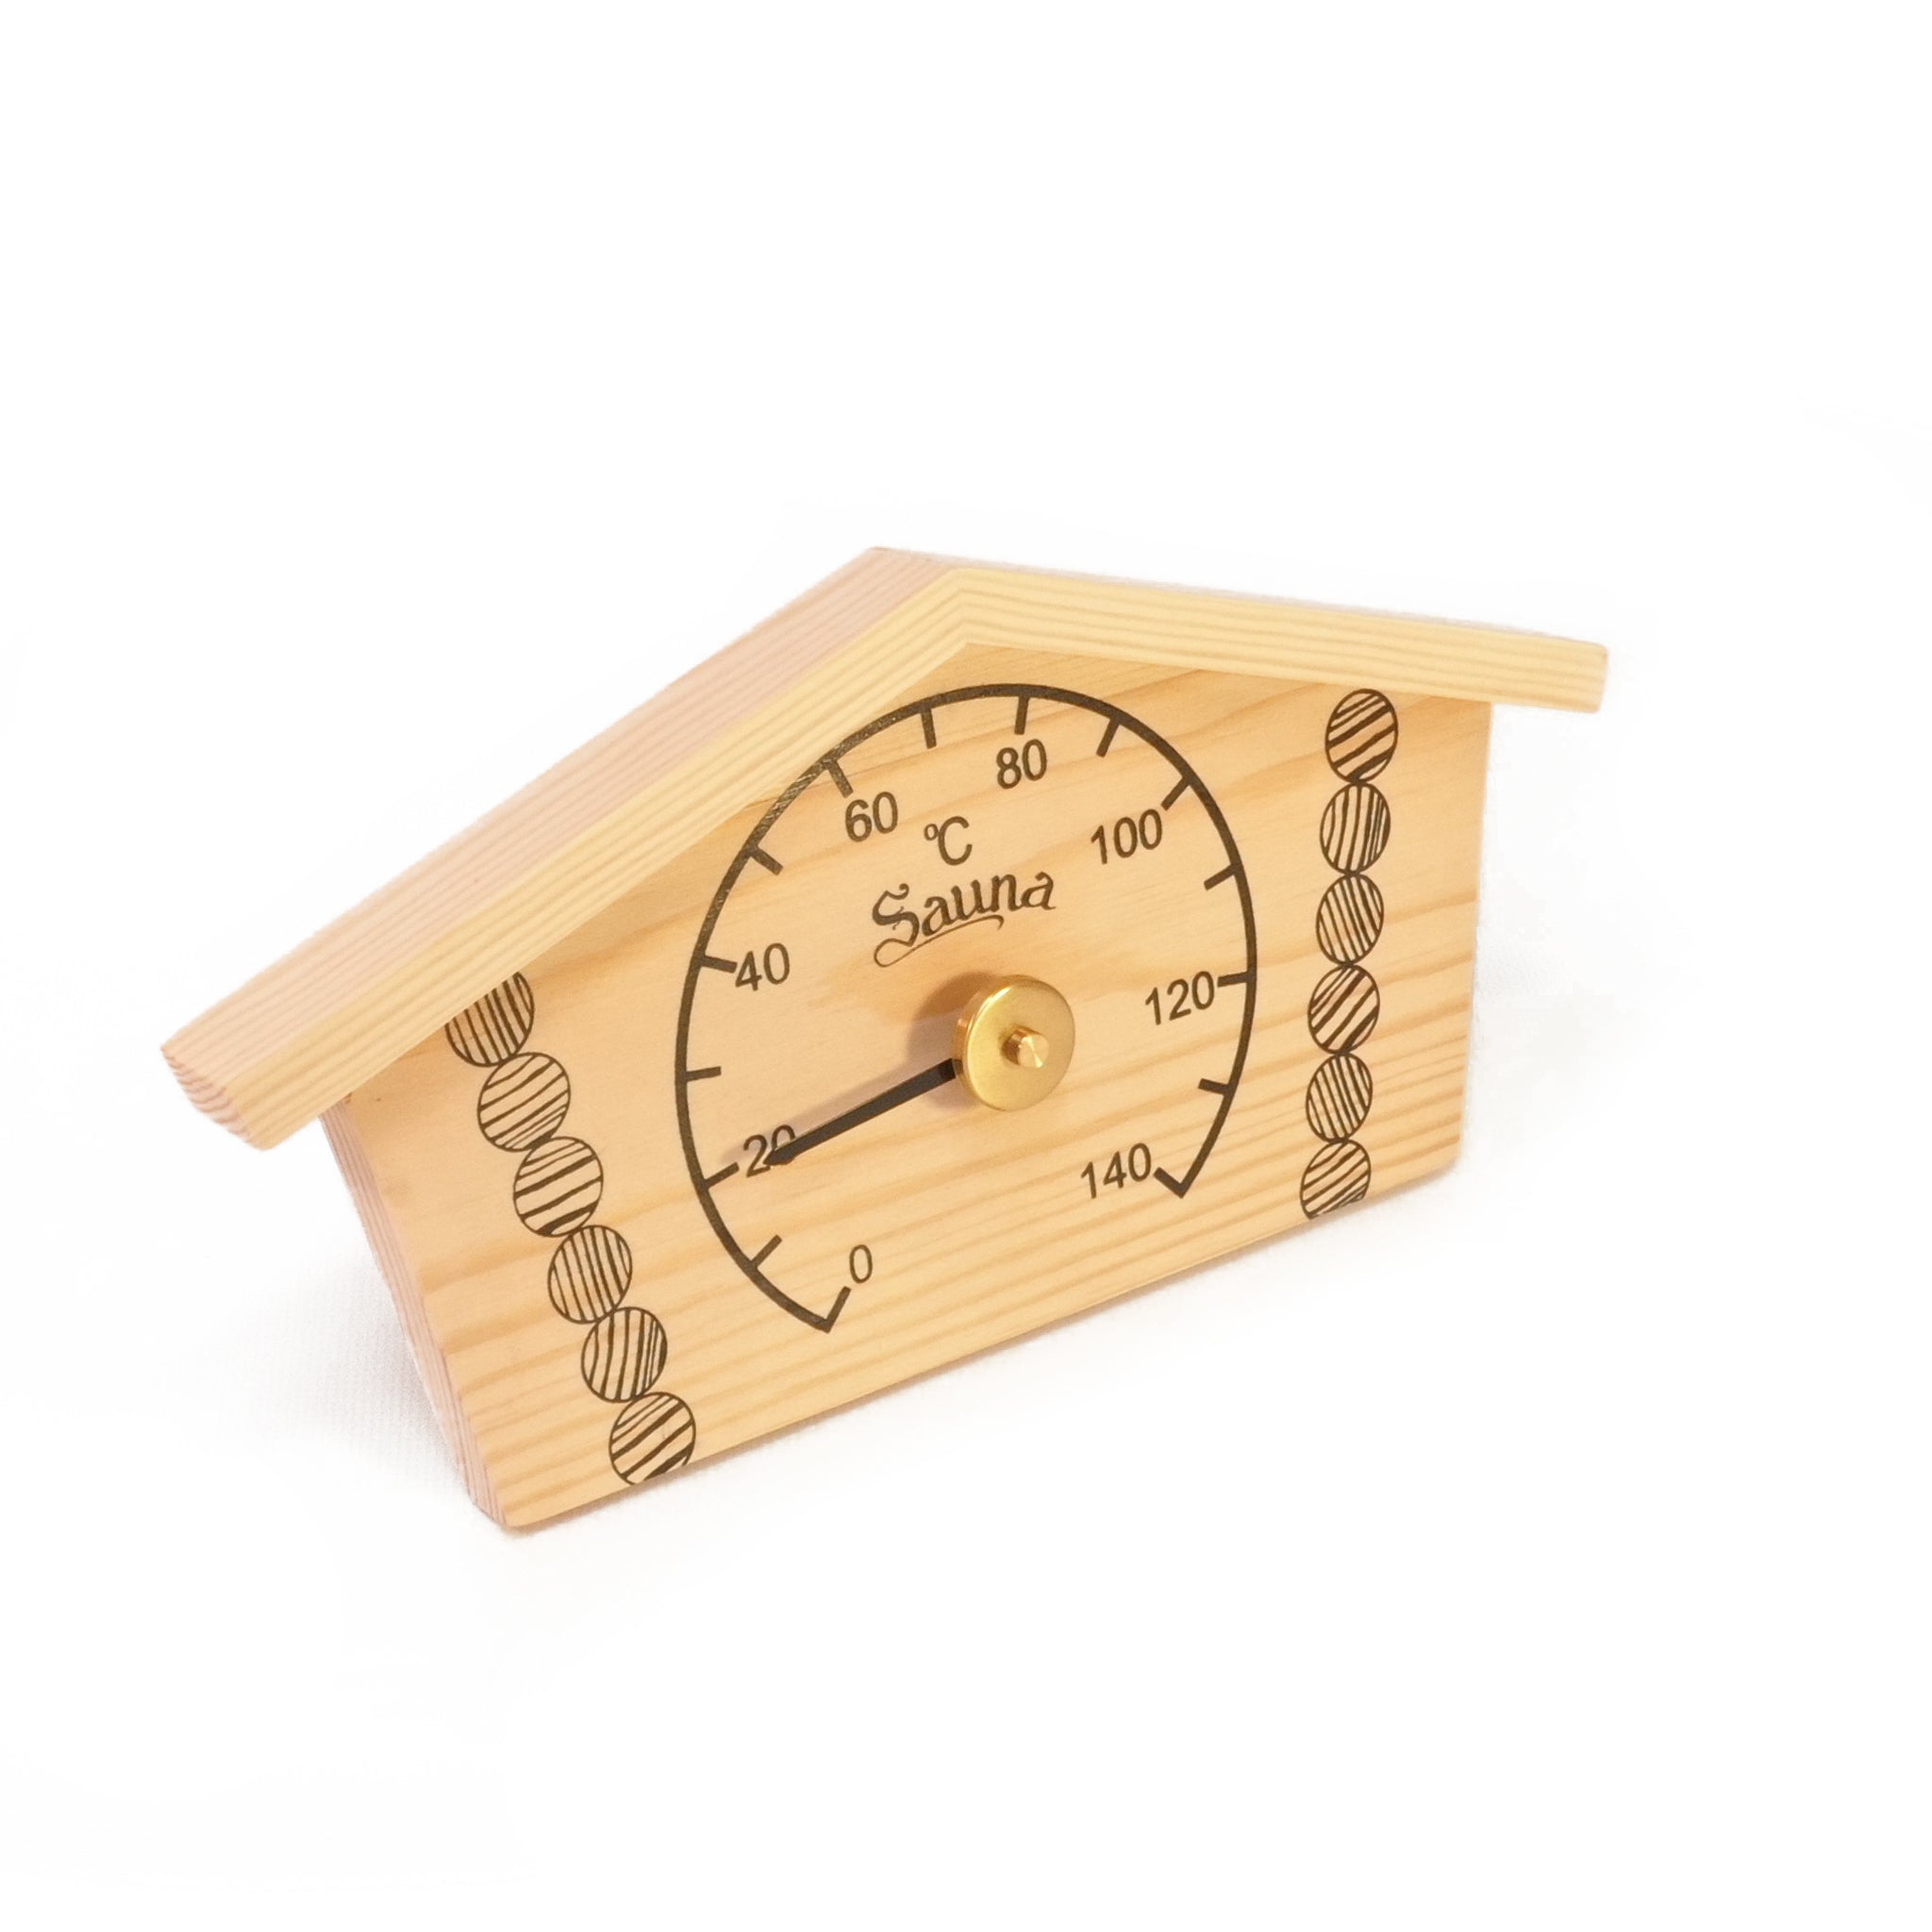 Log cabin themed sauna thermometer on white background.